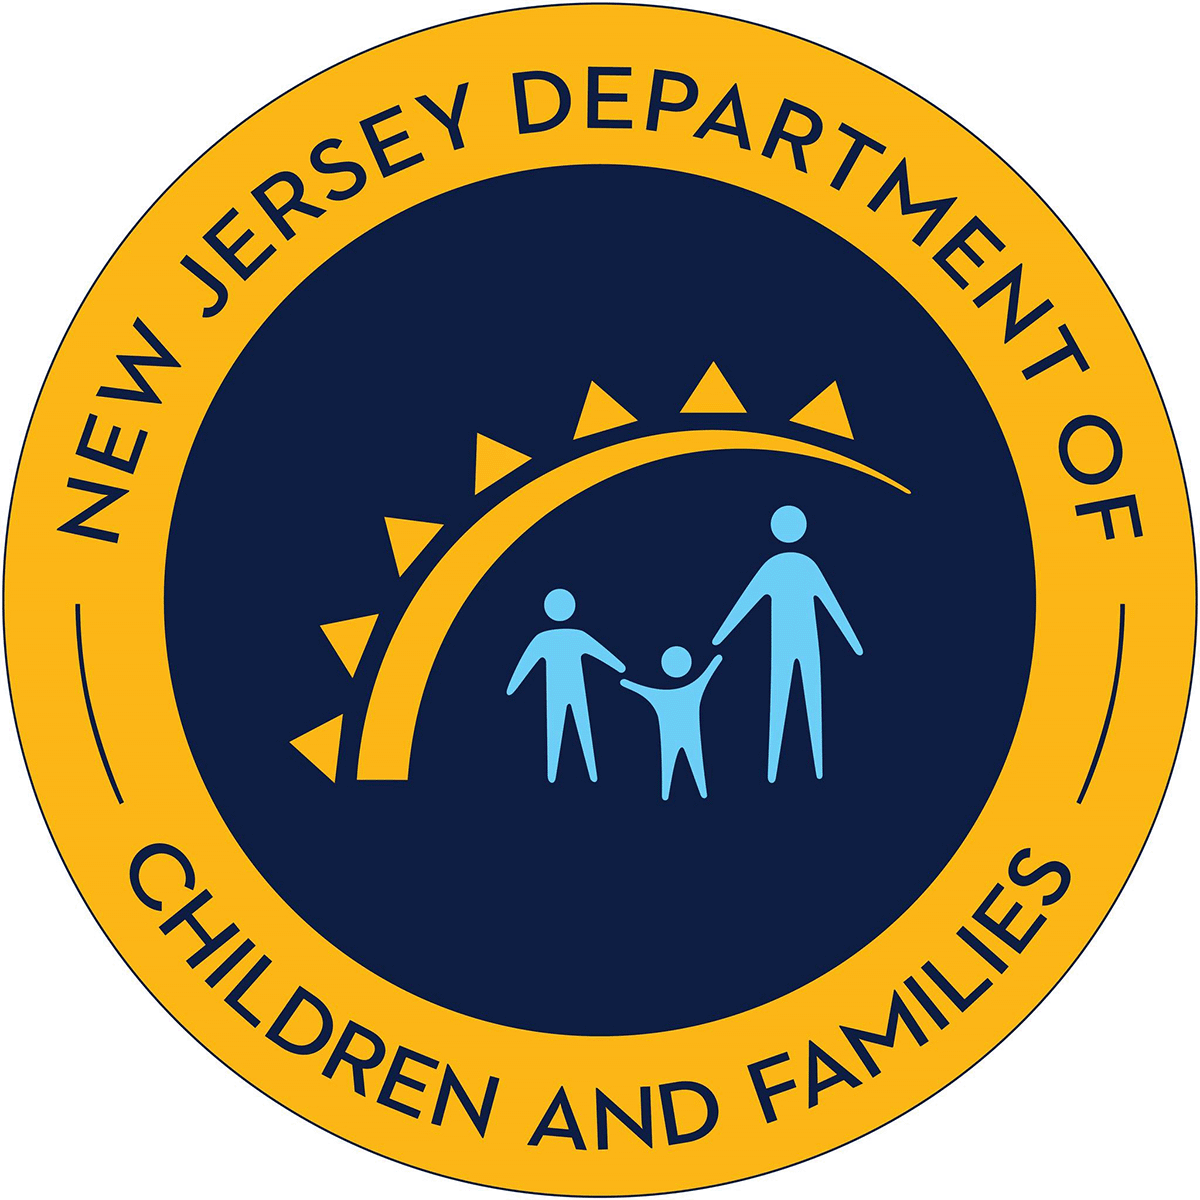 New Jersey Department of Children and Families Logo